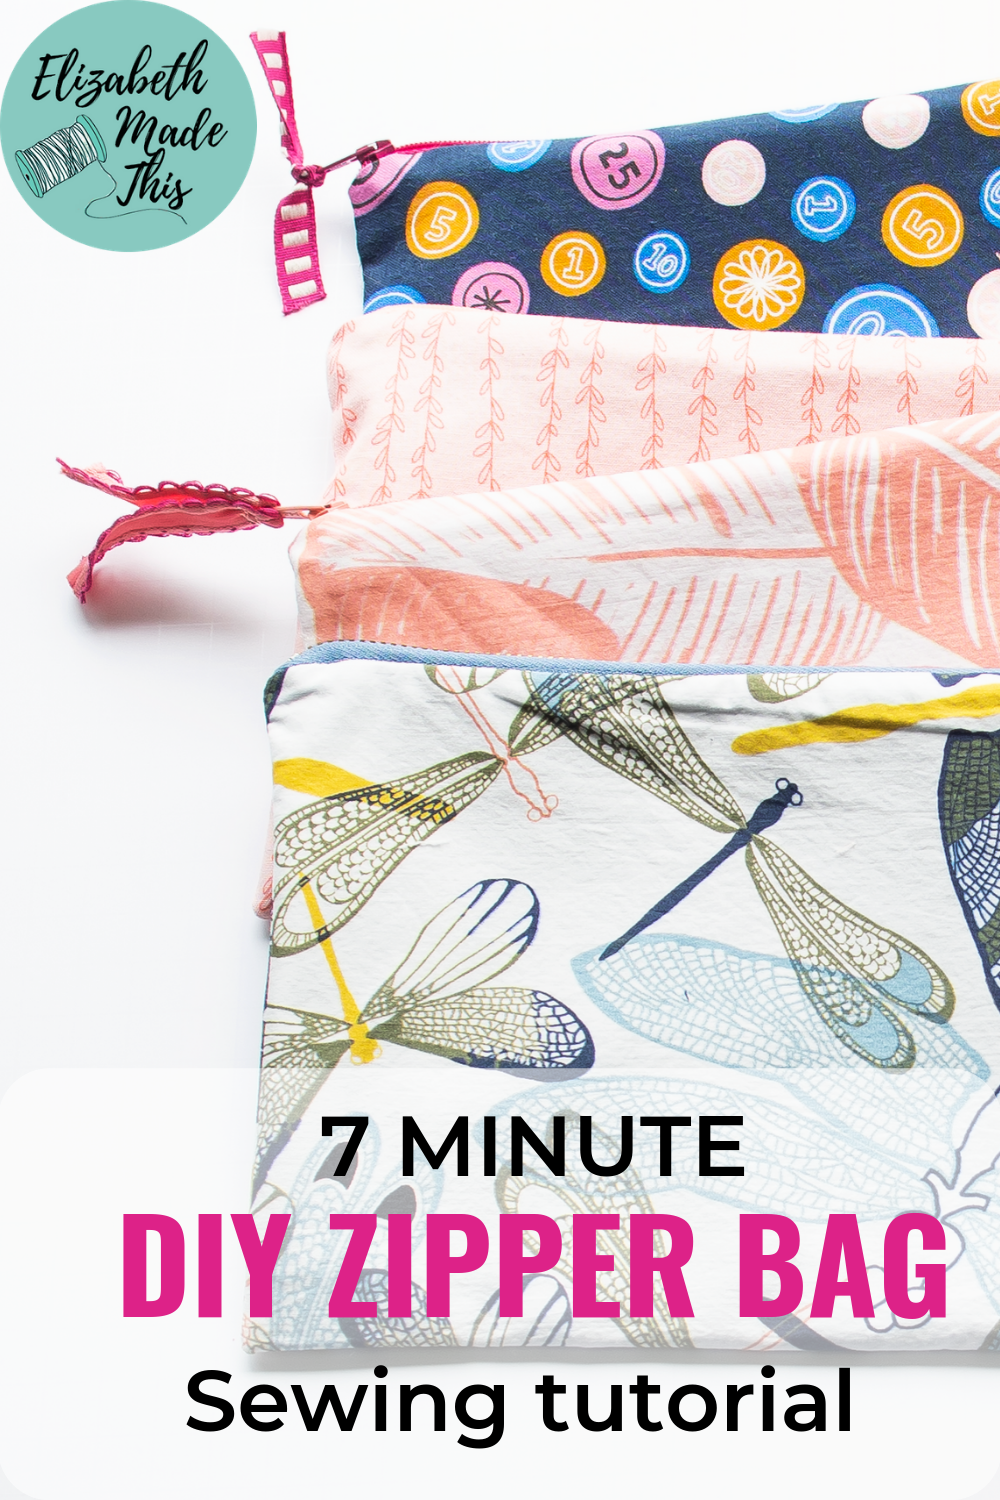 How to sew a zipper bag with a lining tutorial -   18 diy projects Sewing awesome ideas